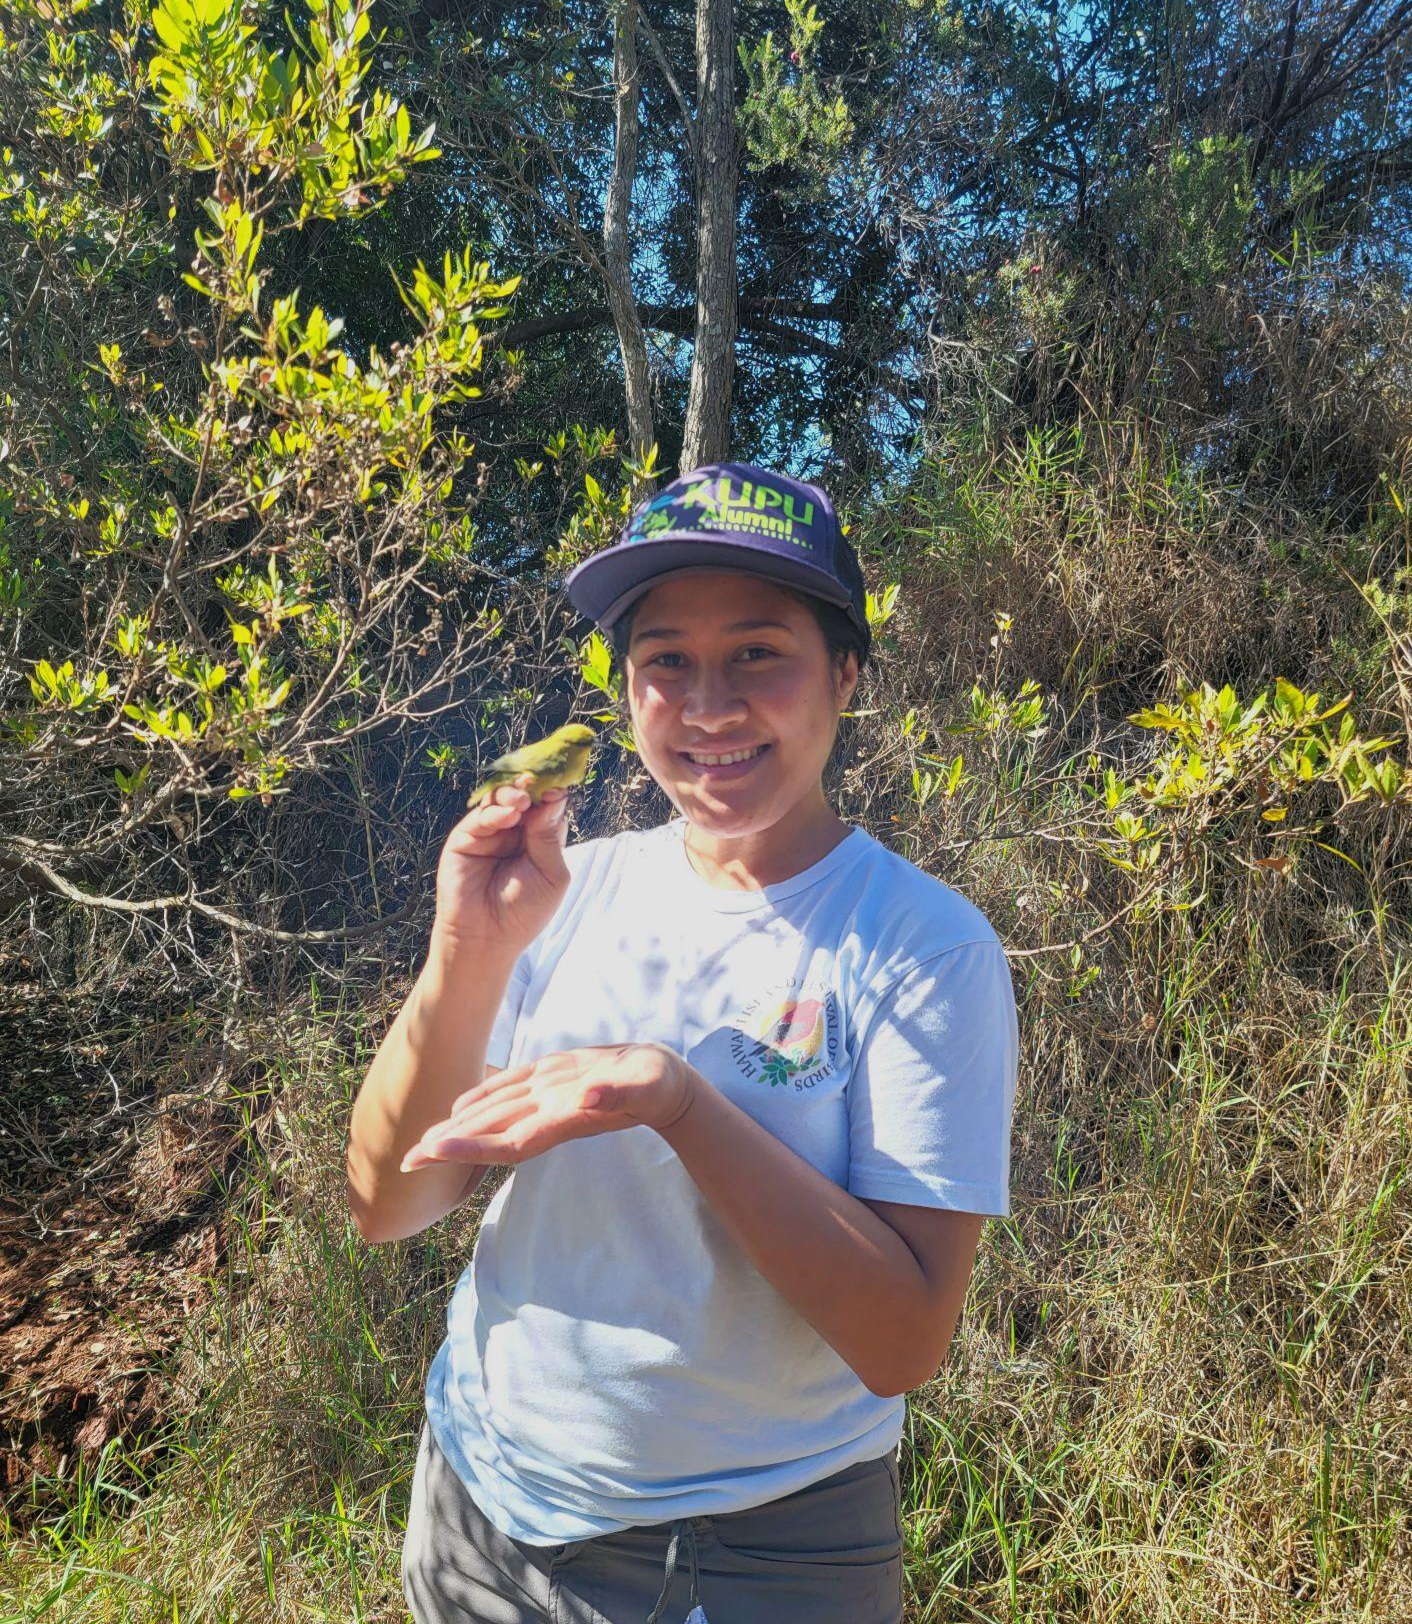 Josie stands in a native forest holding a Hawaiʻi ʻamakihi, a little yellow honeycreeper